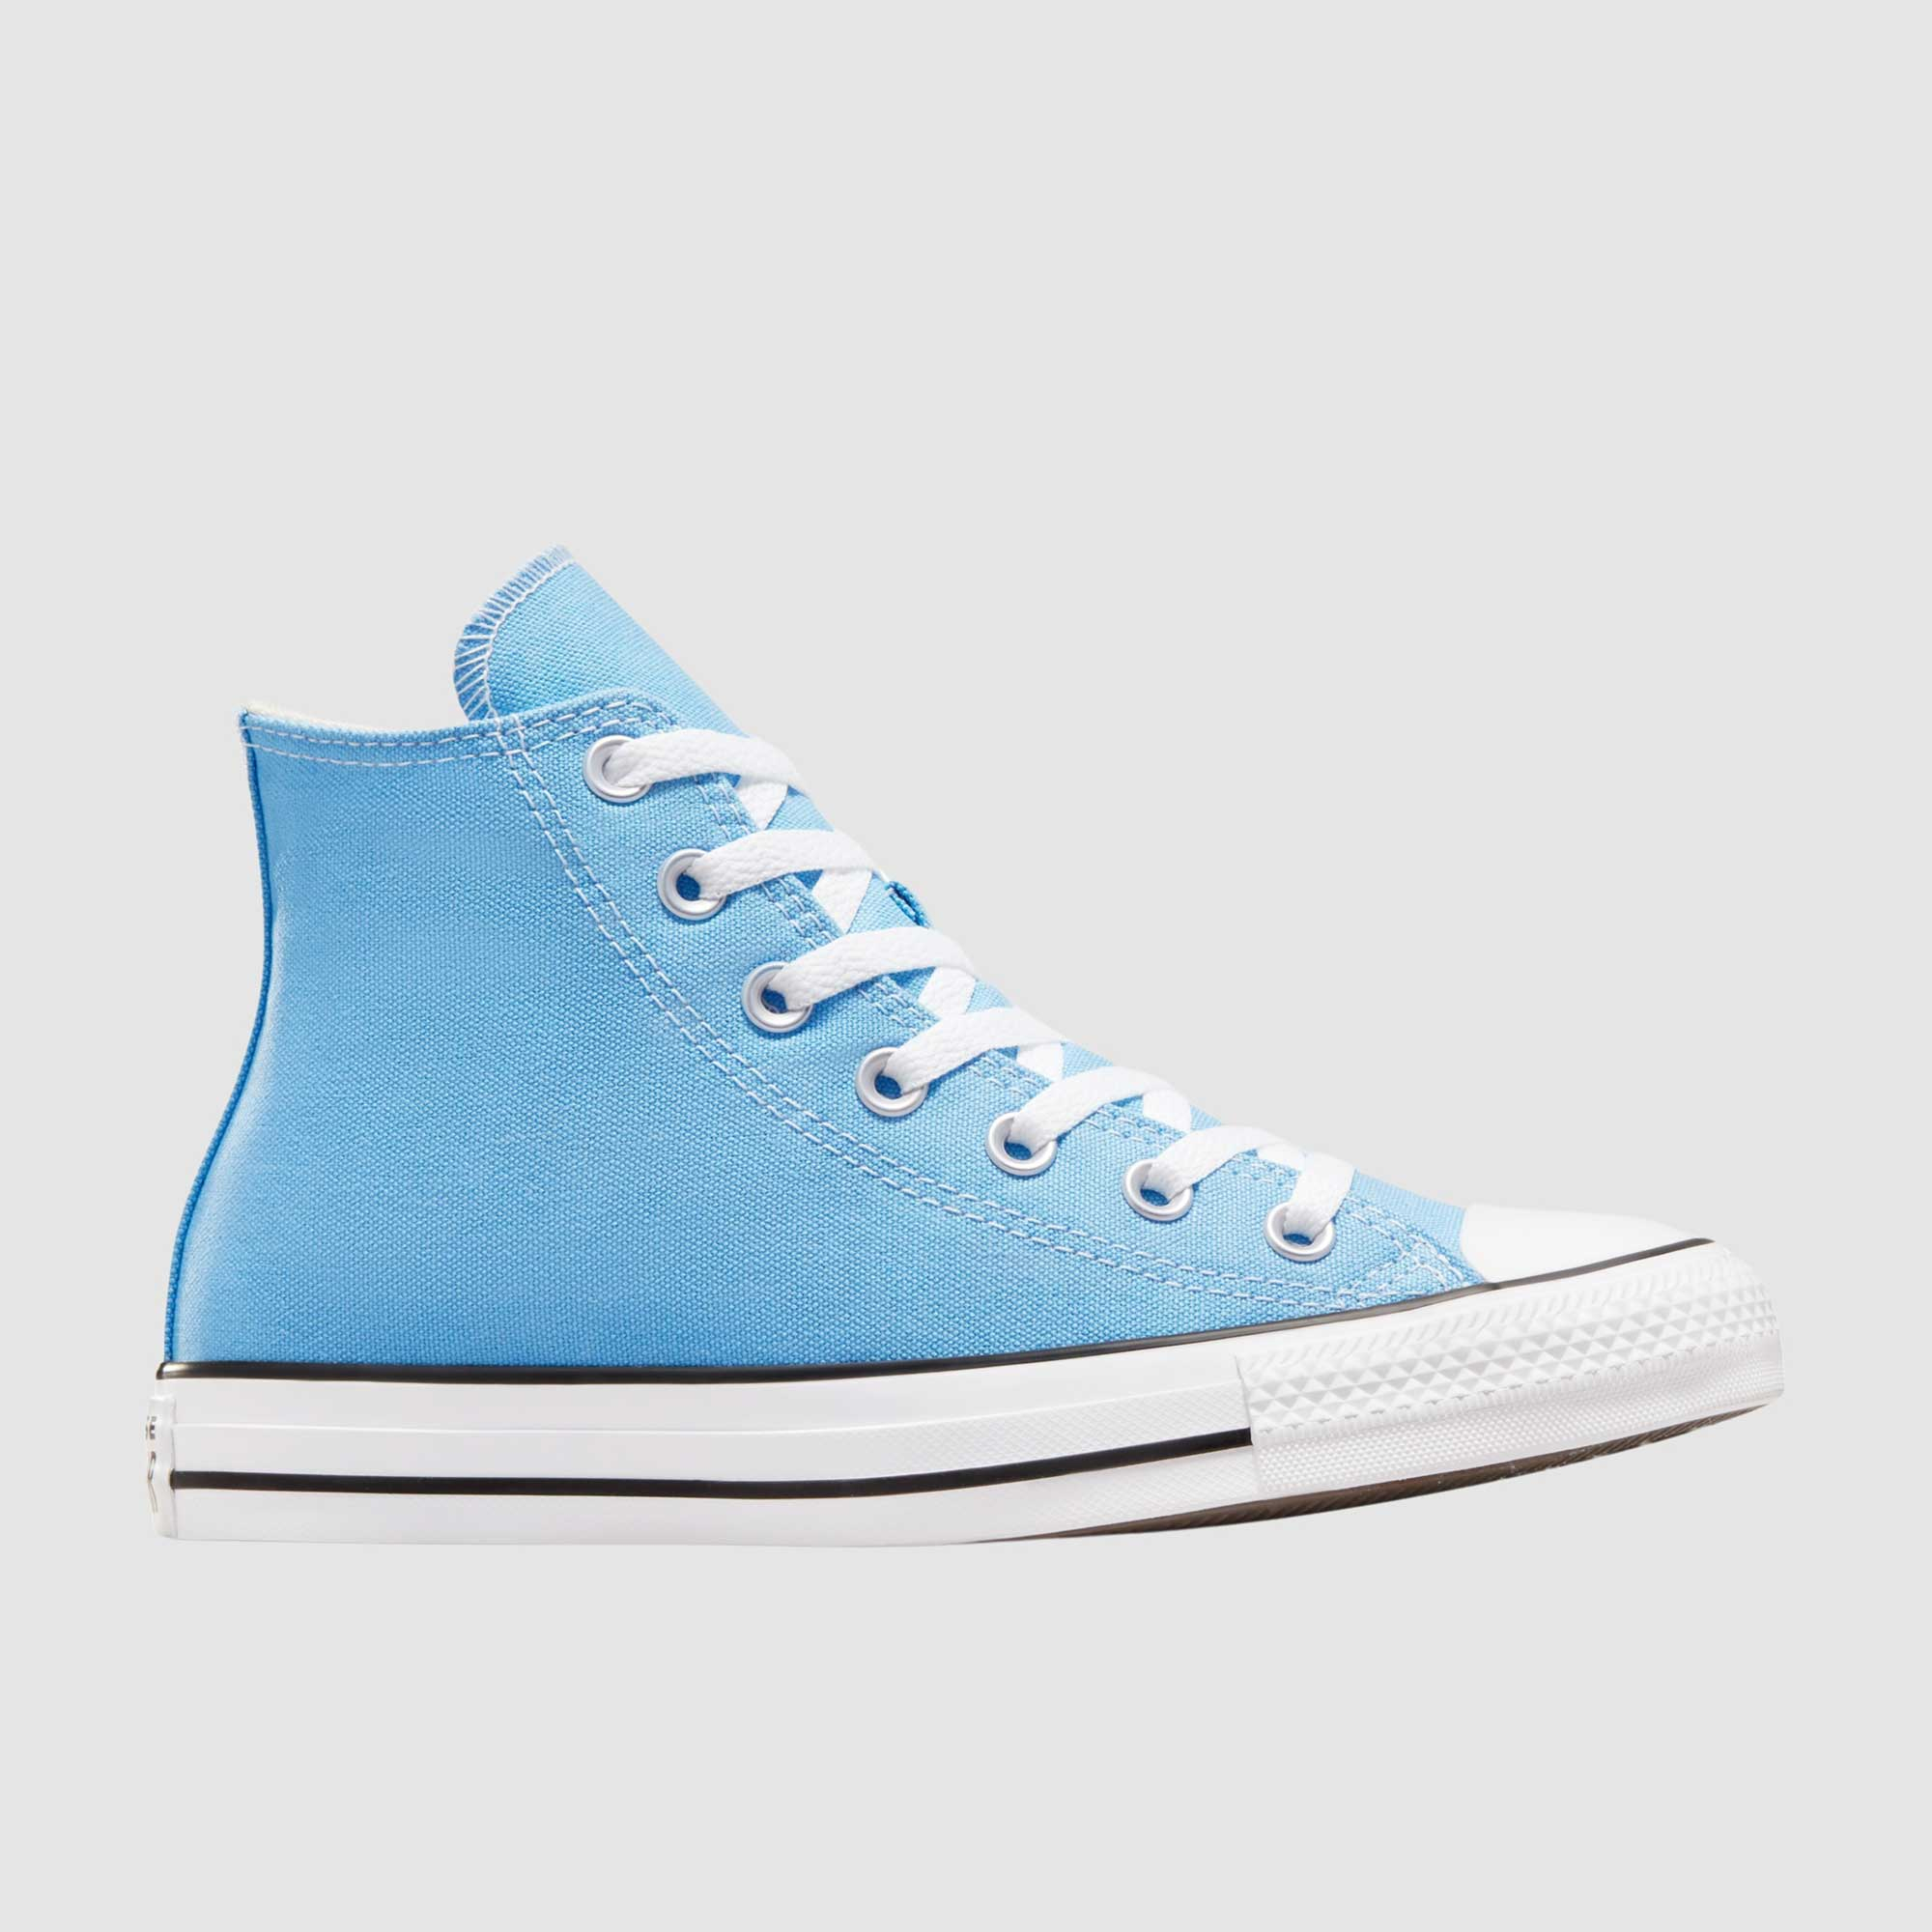 Converse Unisex CT All Star Hi Lifestyle Shoes